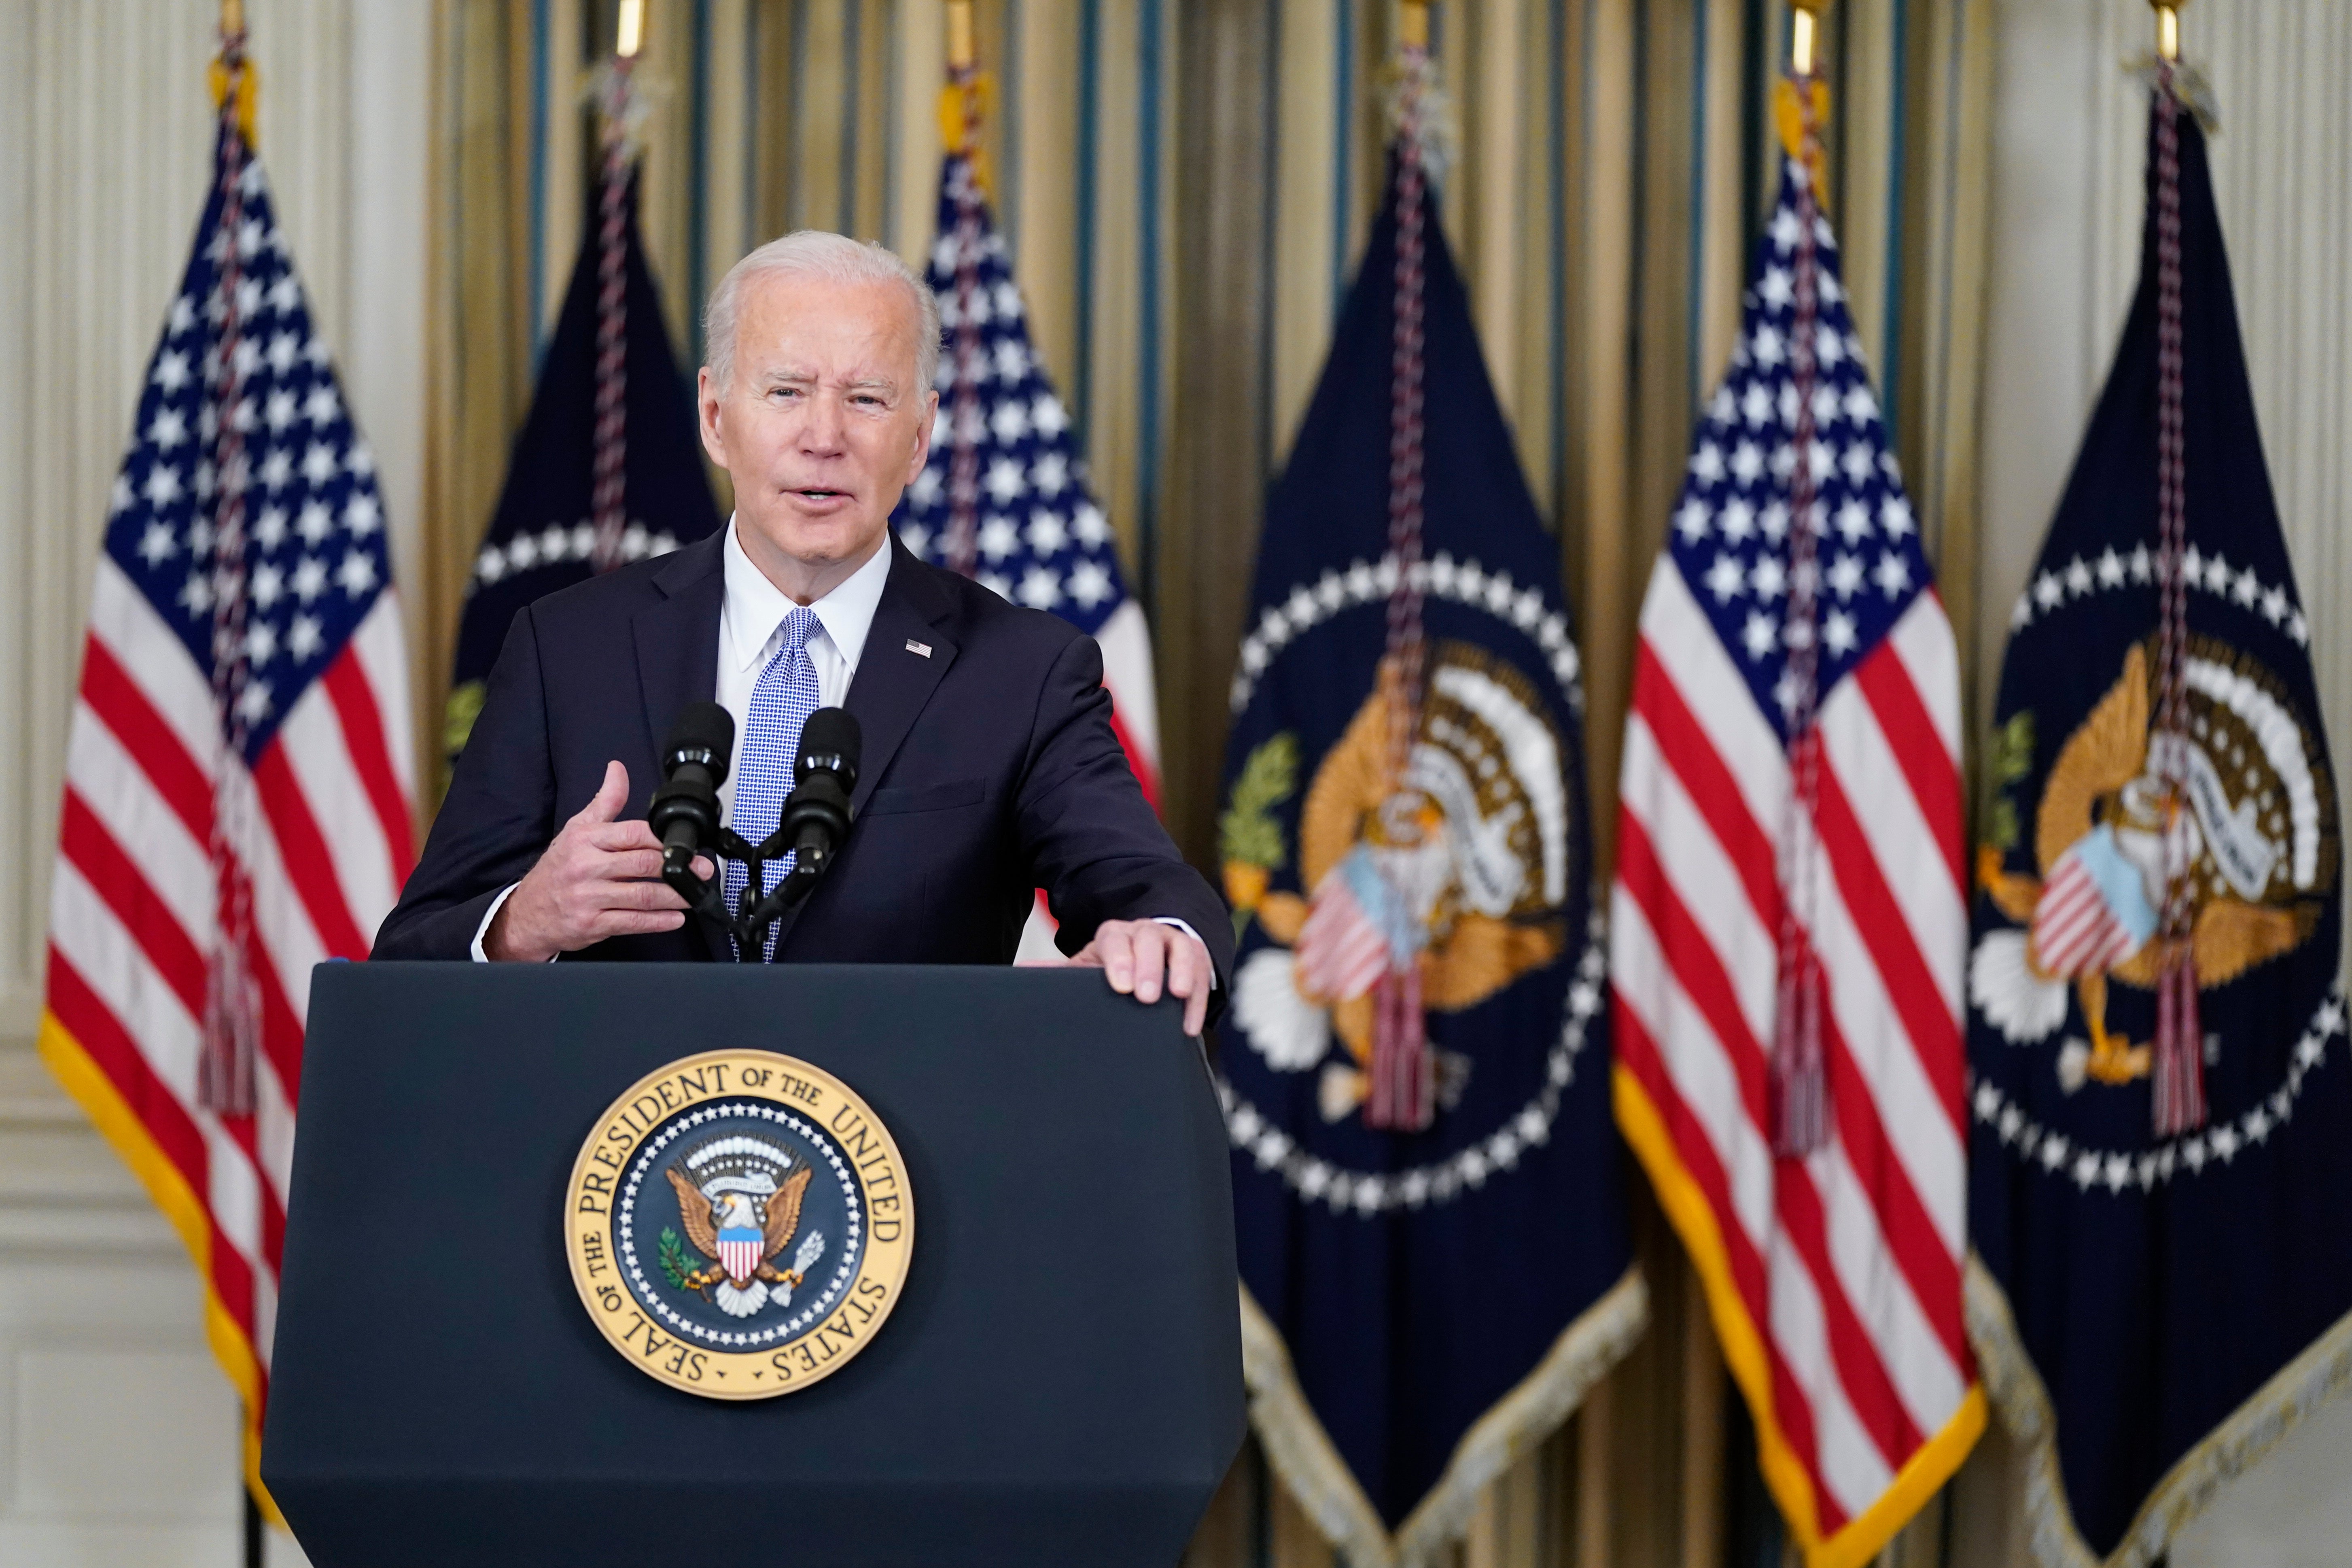 President Joe Biden speaks about the March jobs report in the State Dining Room of the White House, Friday, April 1, 2022